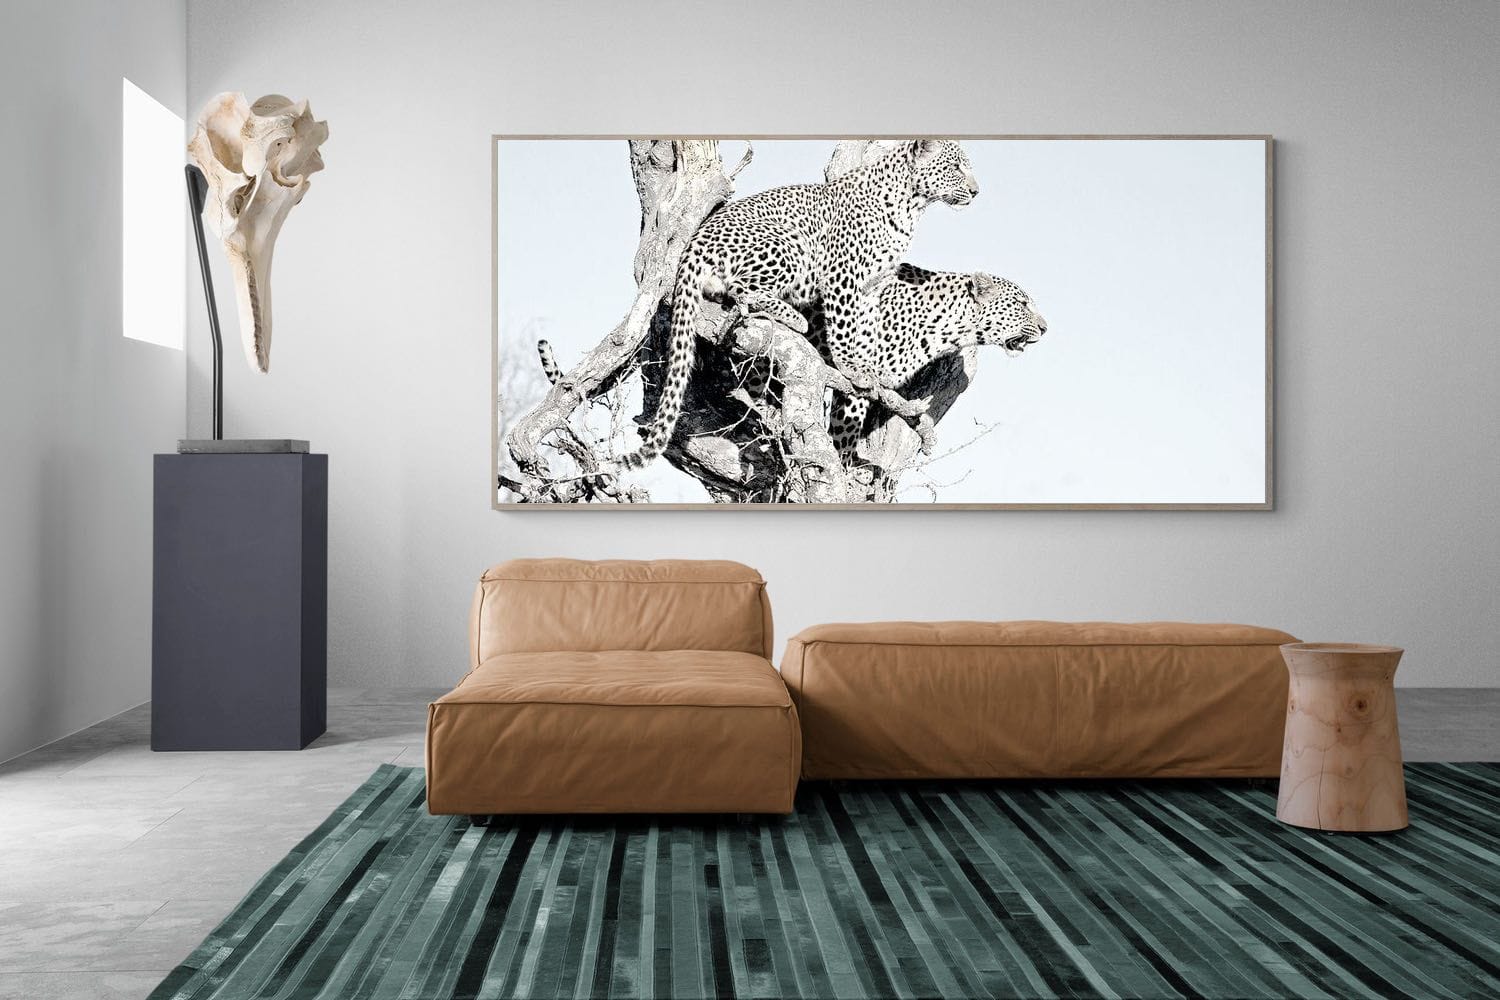 Poised Leopards-Wall_Art-275 x 130cm-Mounted Canvas-Wood-Pixalot